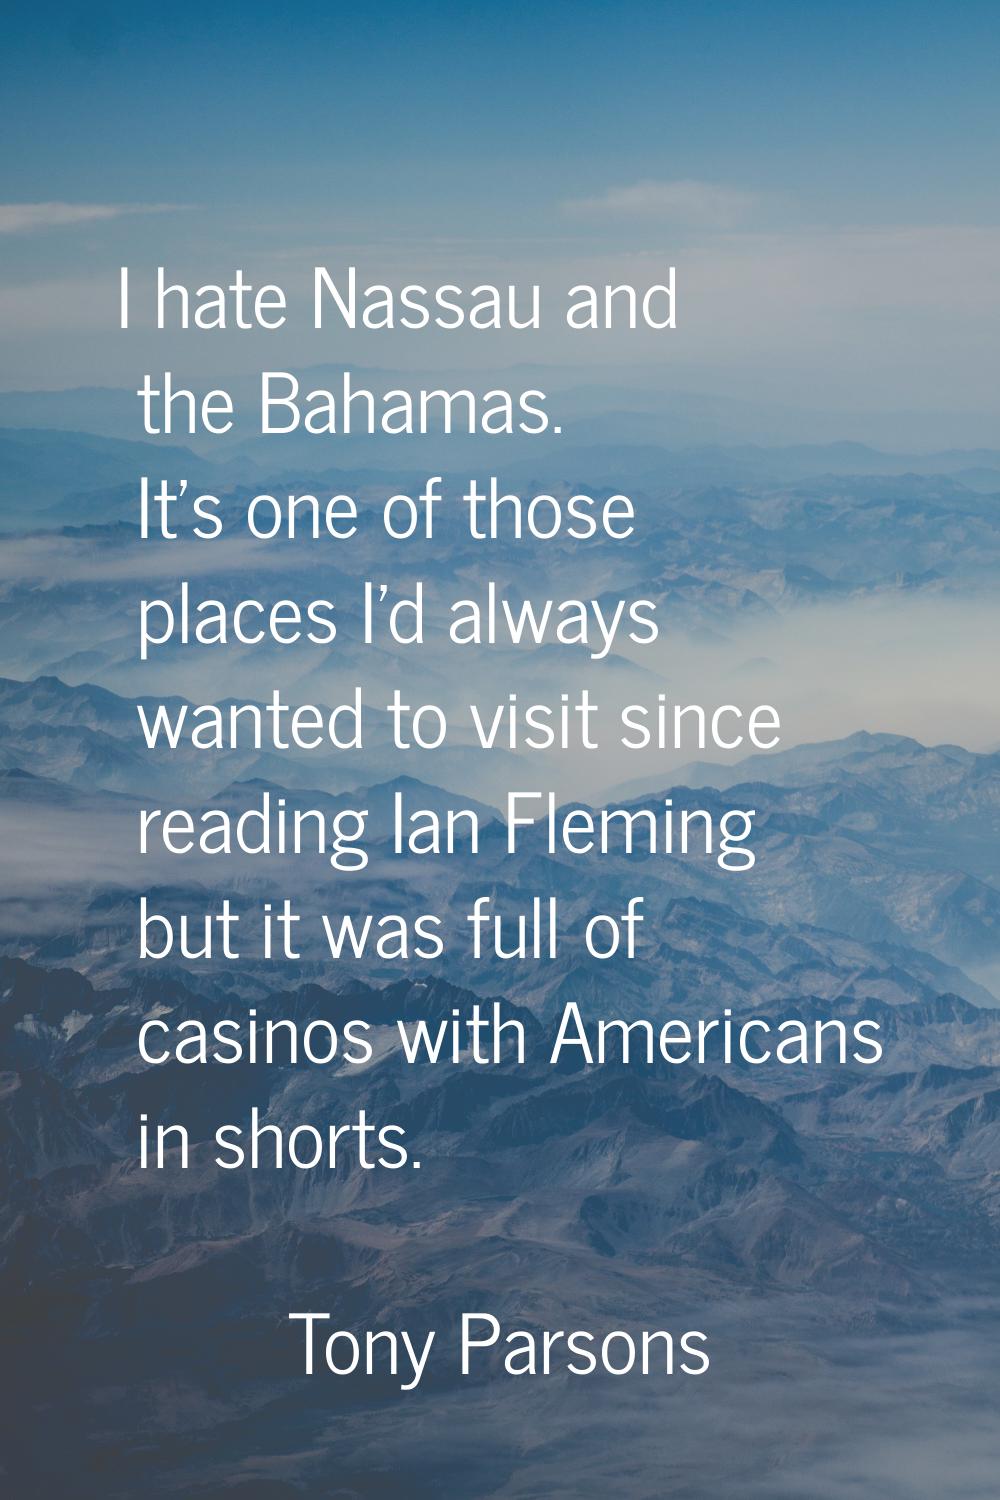 I hate Nassau and the Bahamas. It's one of those places I'd always wanted to visit since reading Ia